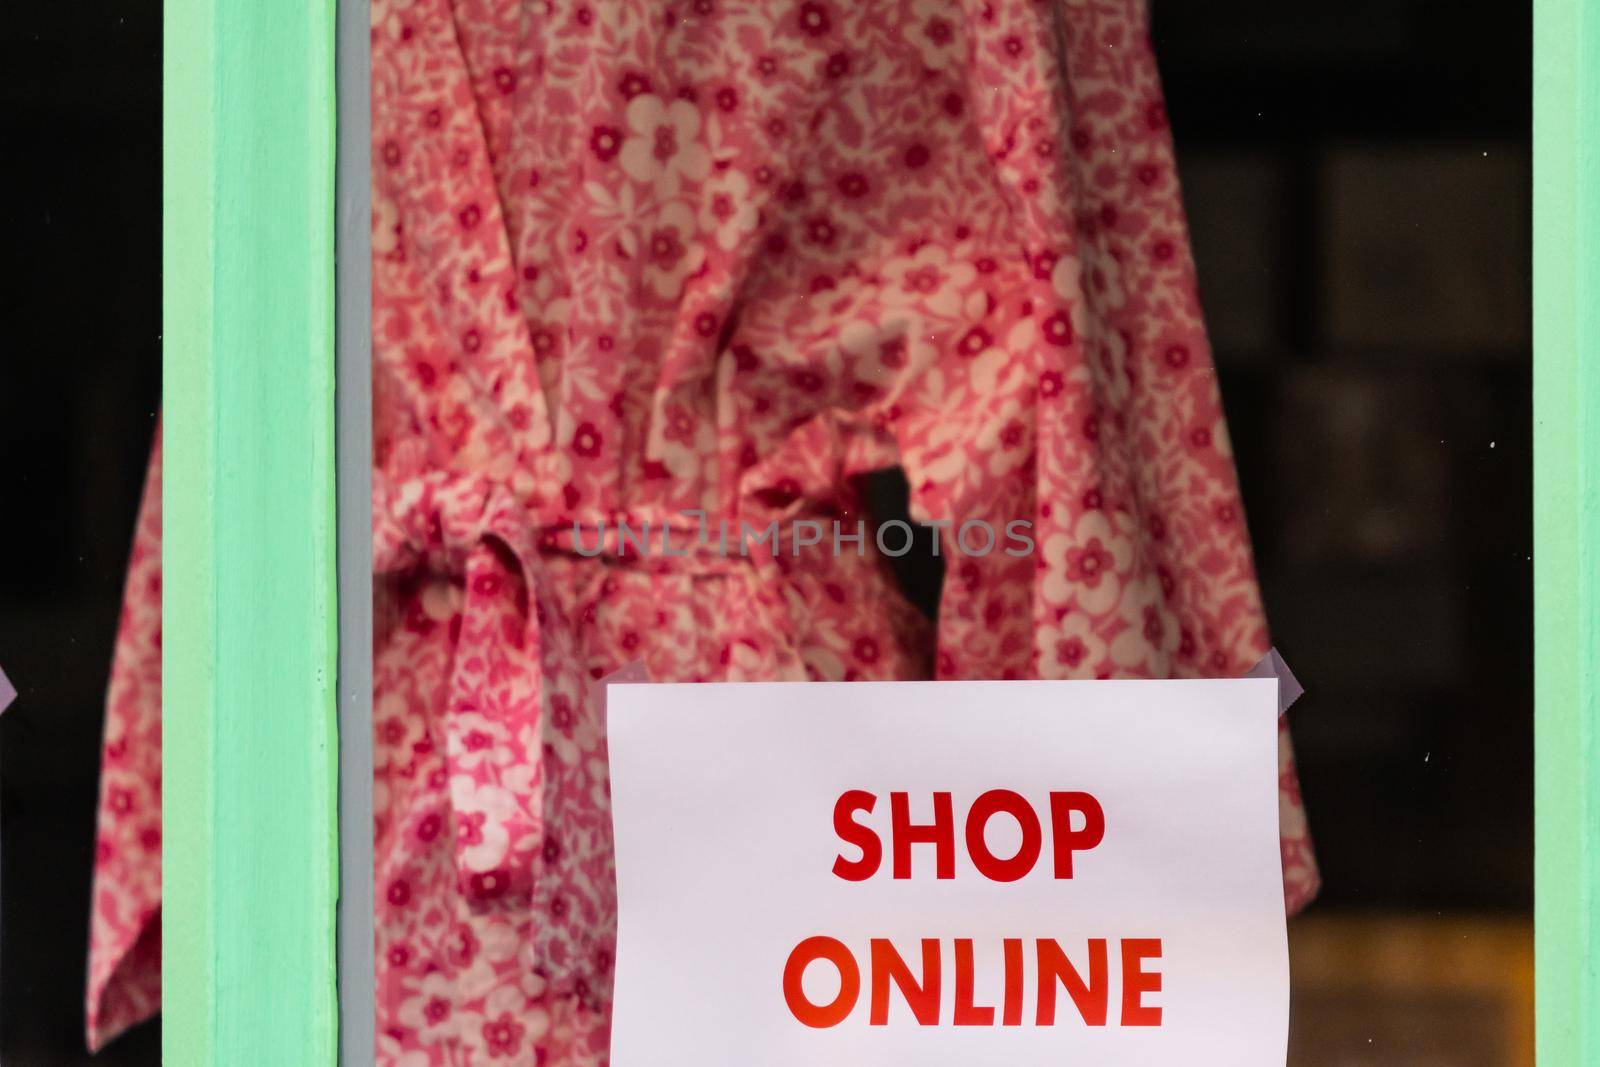 Shop online sign on high street shop window during Covid-19 lockdown by mauricallari